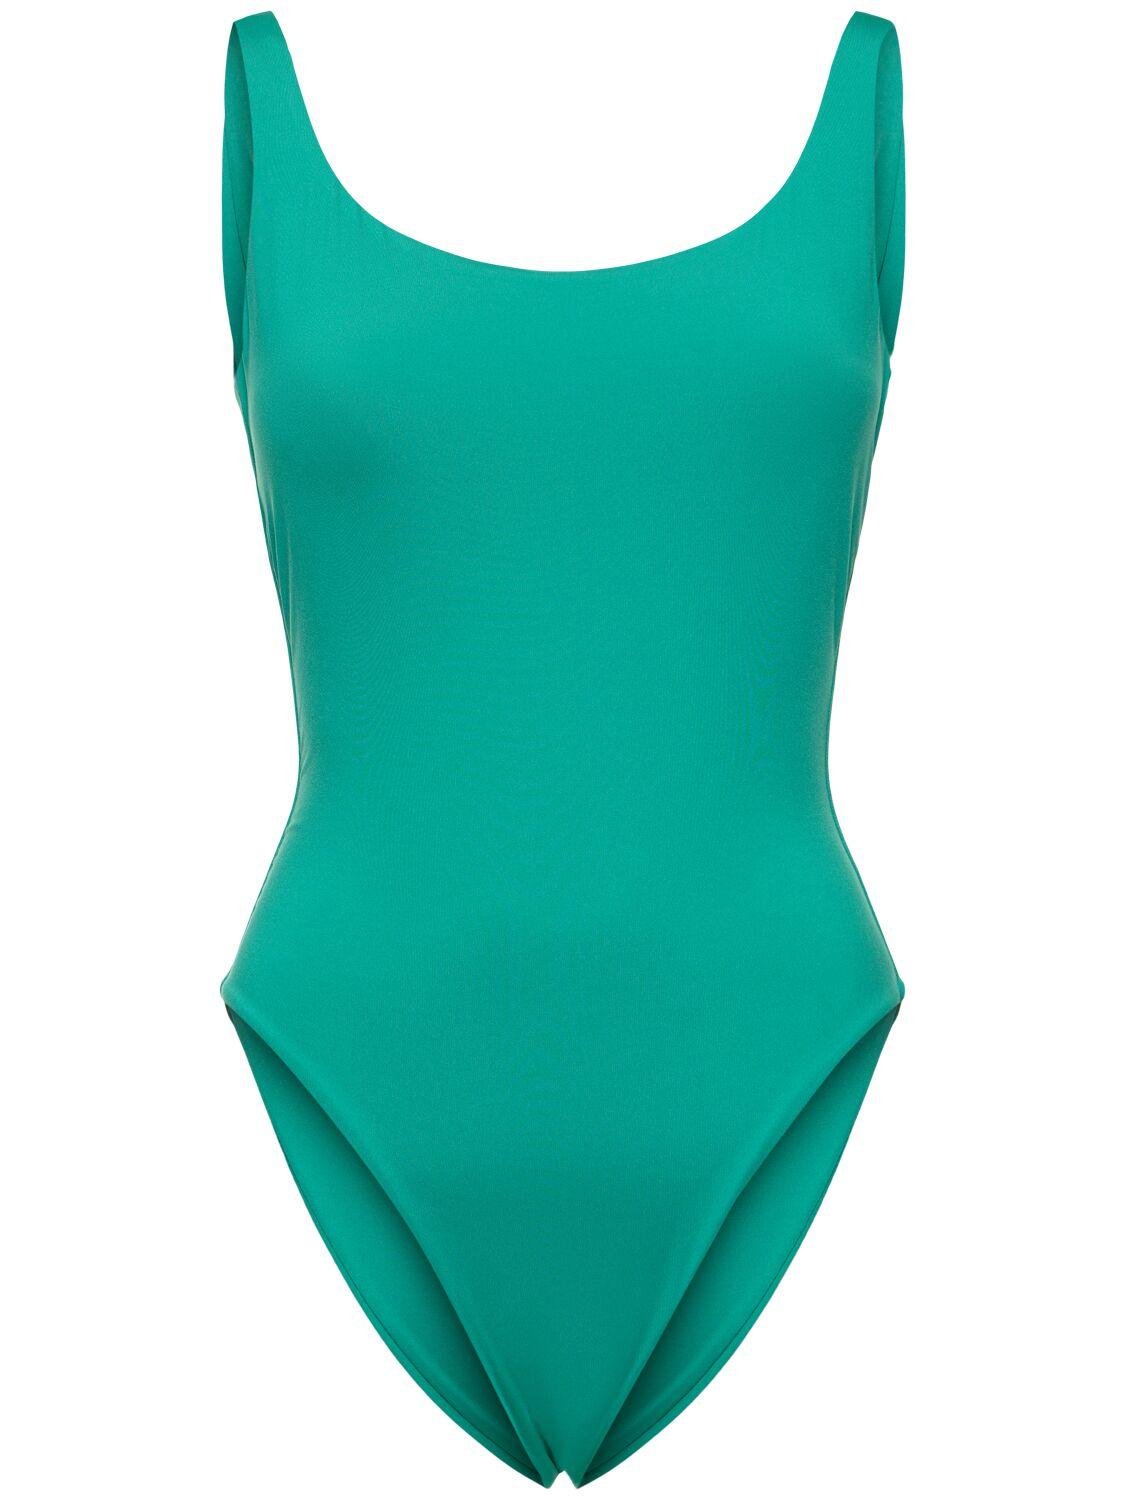 Camilla Jersey One Piece Swimsuit by MAX MARA